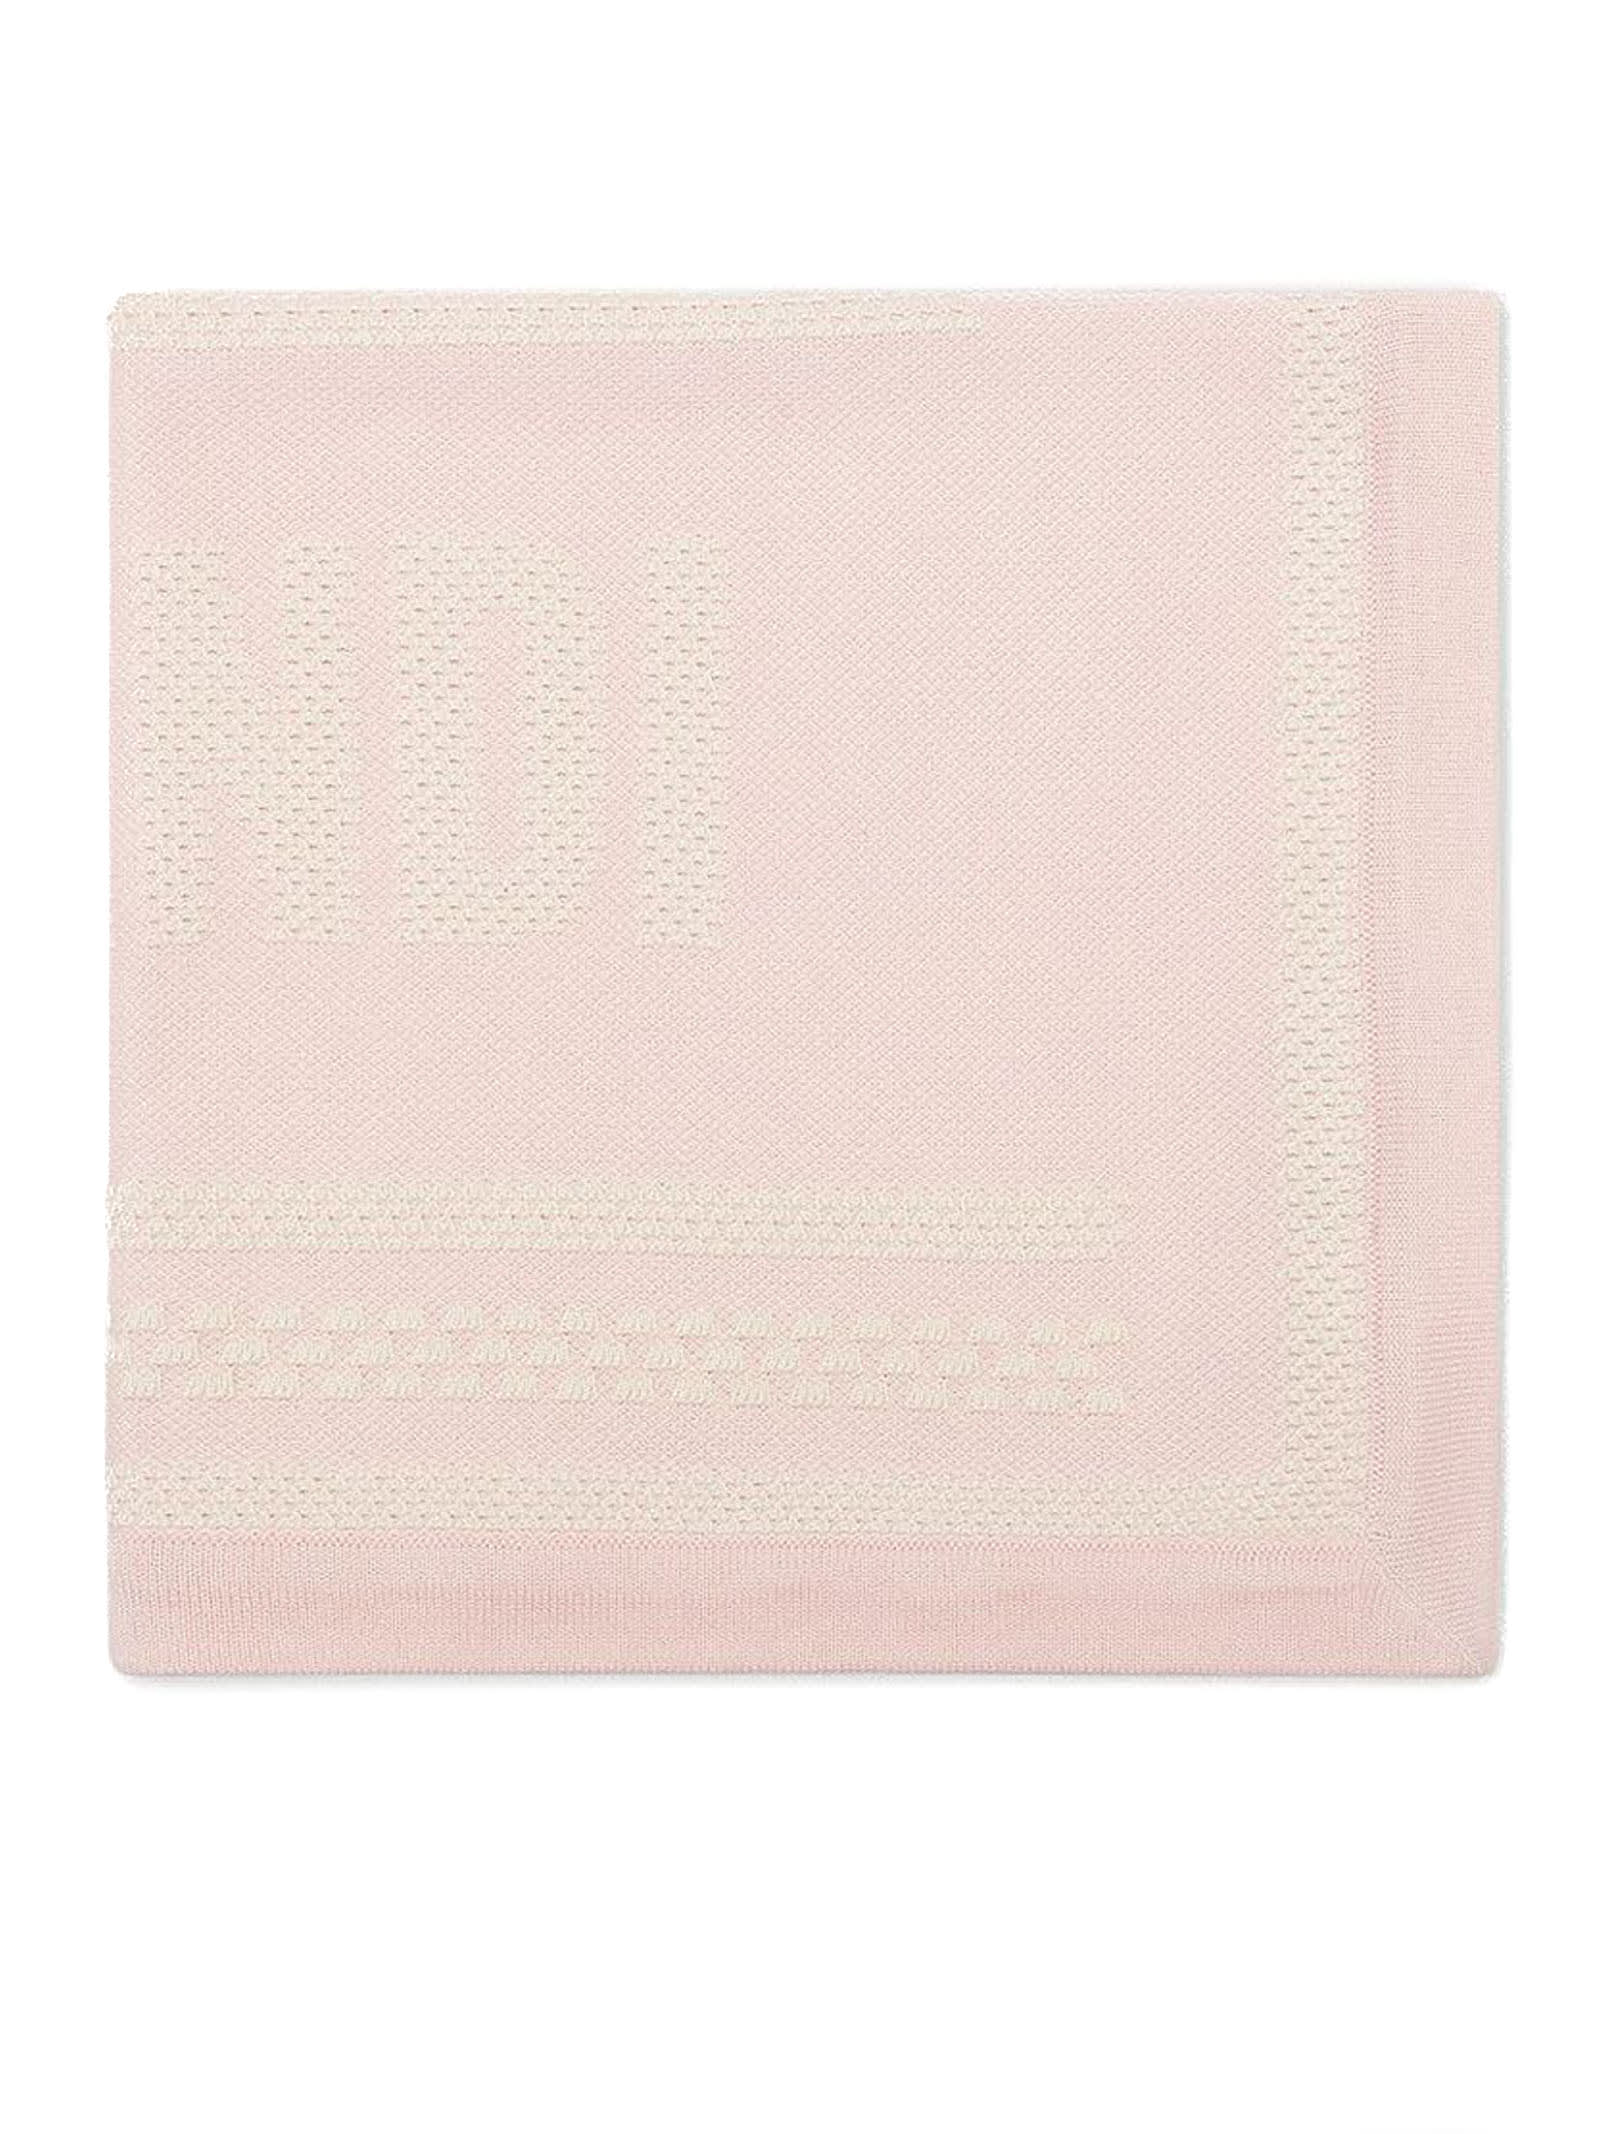 Fendi Pink Cotton And Cashmere Baby Blanket